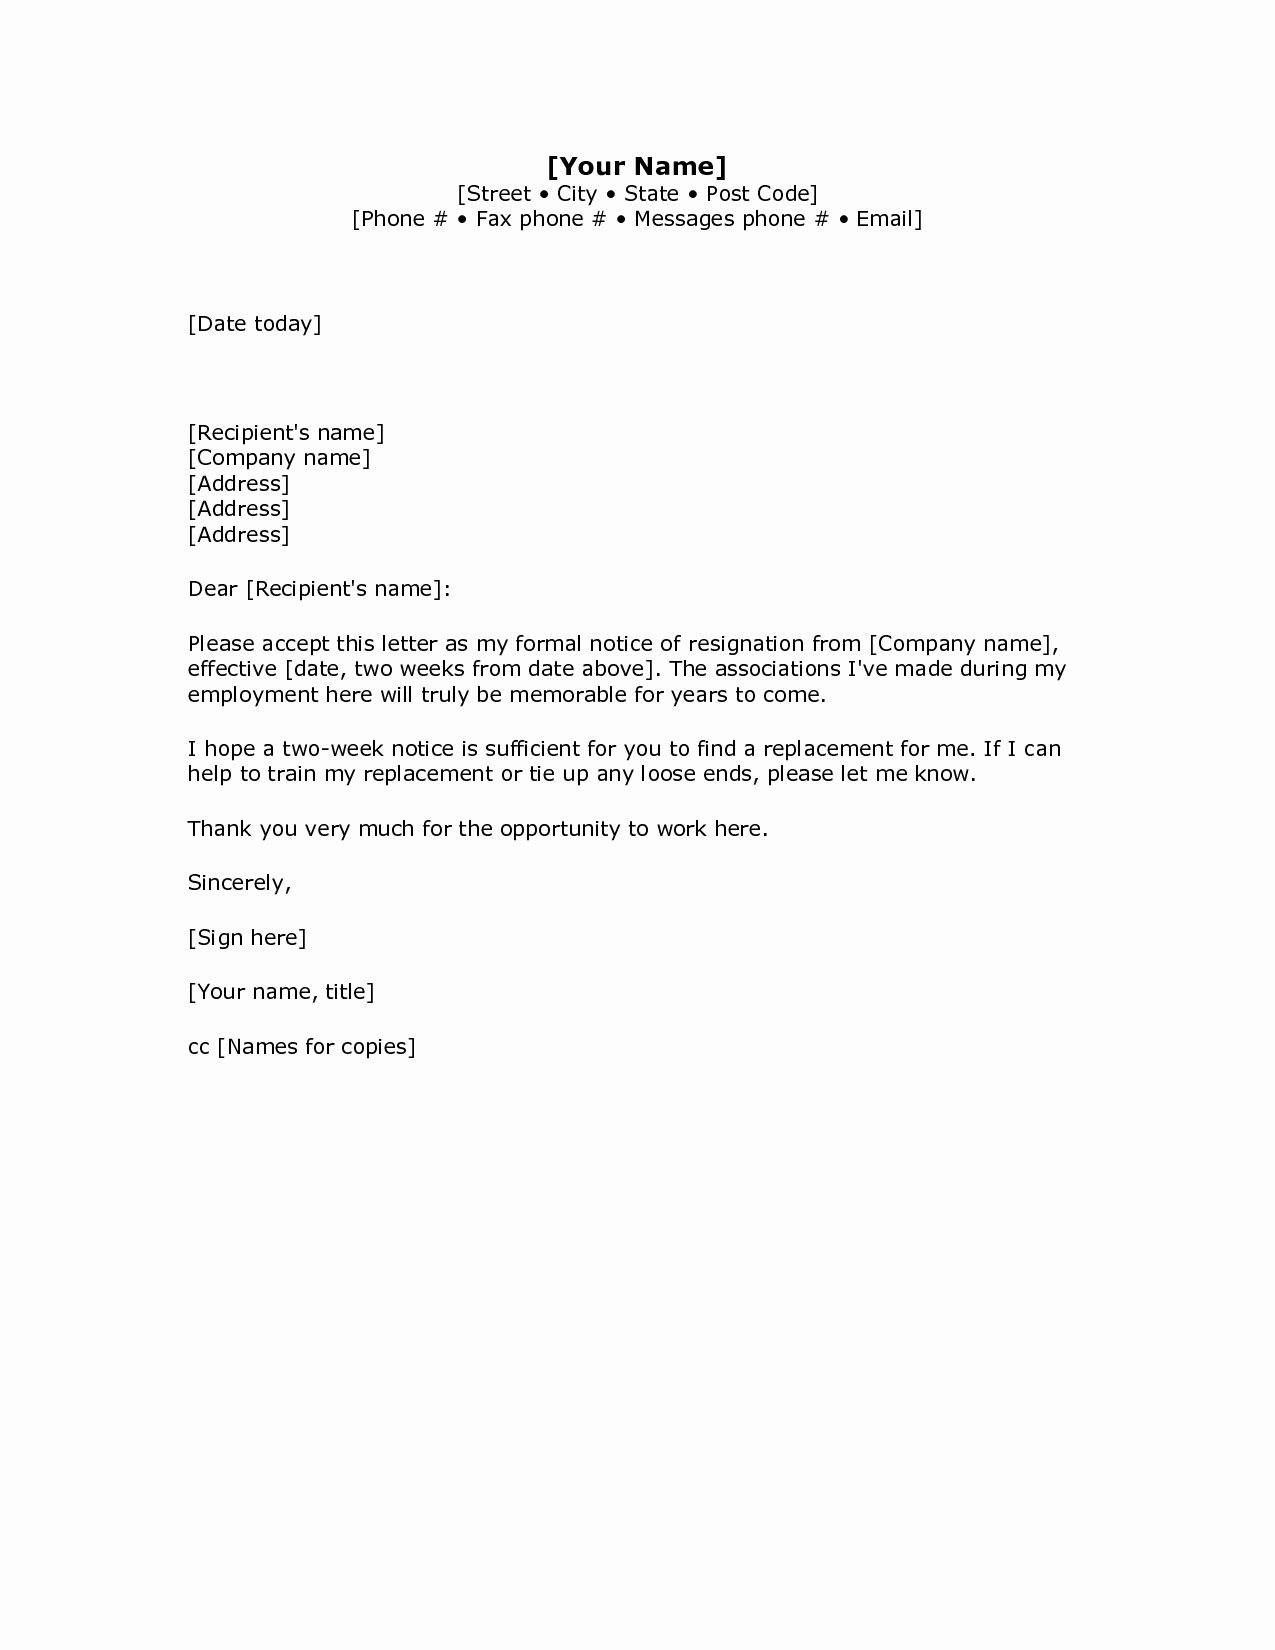 Resignation Letter 2 Week Notice Awesome 2 Weeks Notice Letter Resignation Letter Week Notice Words